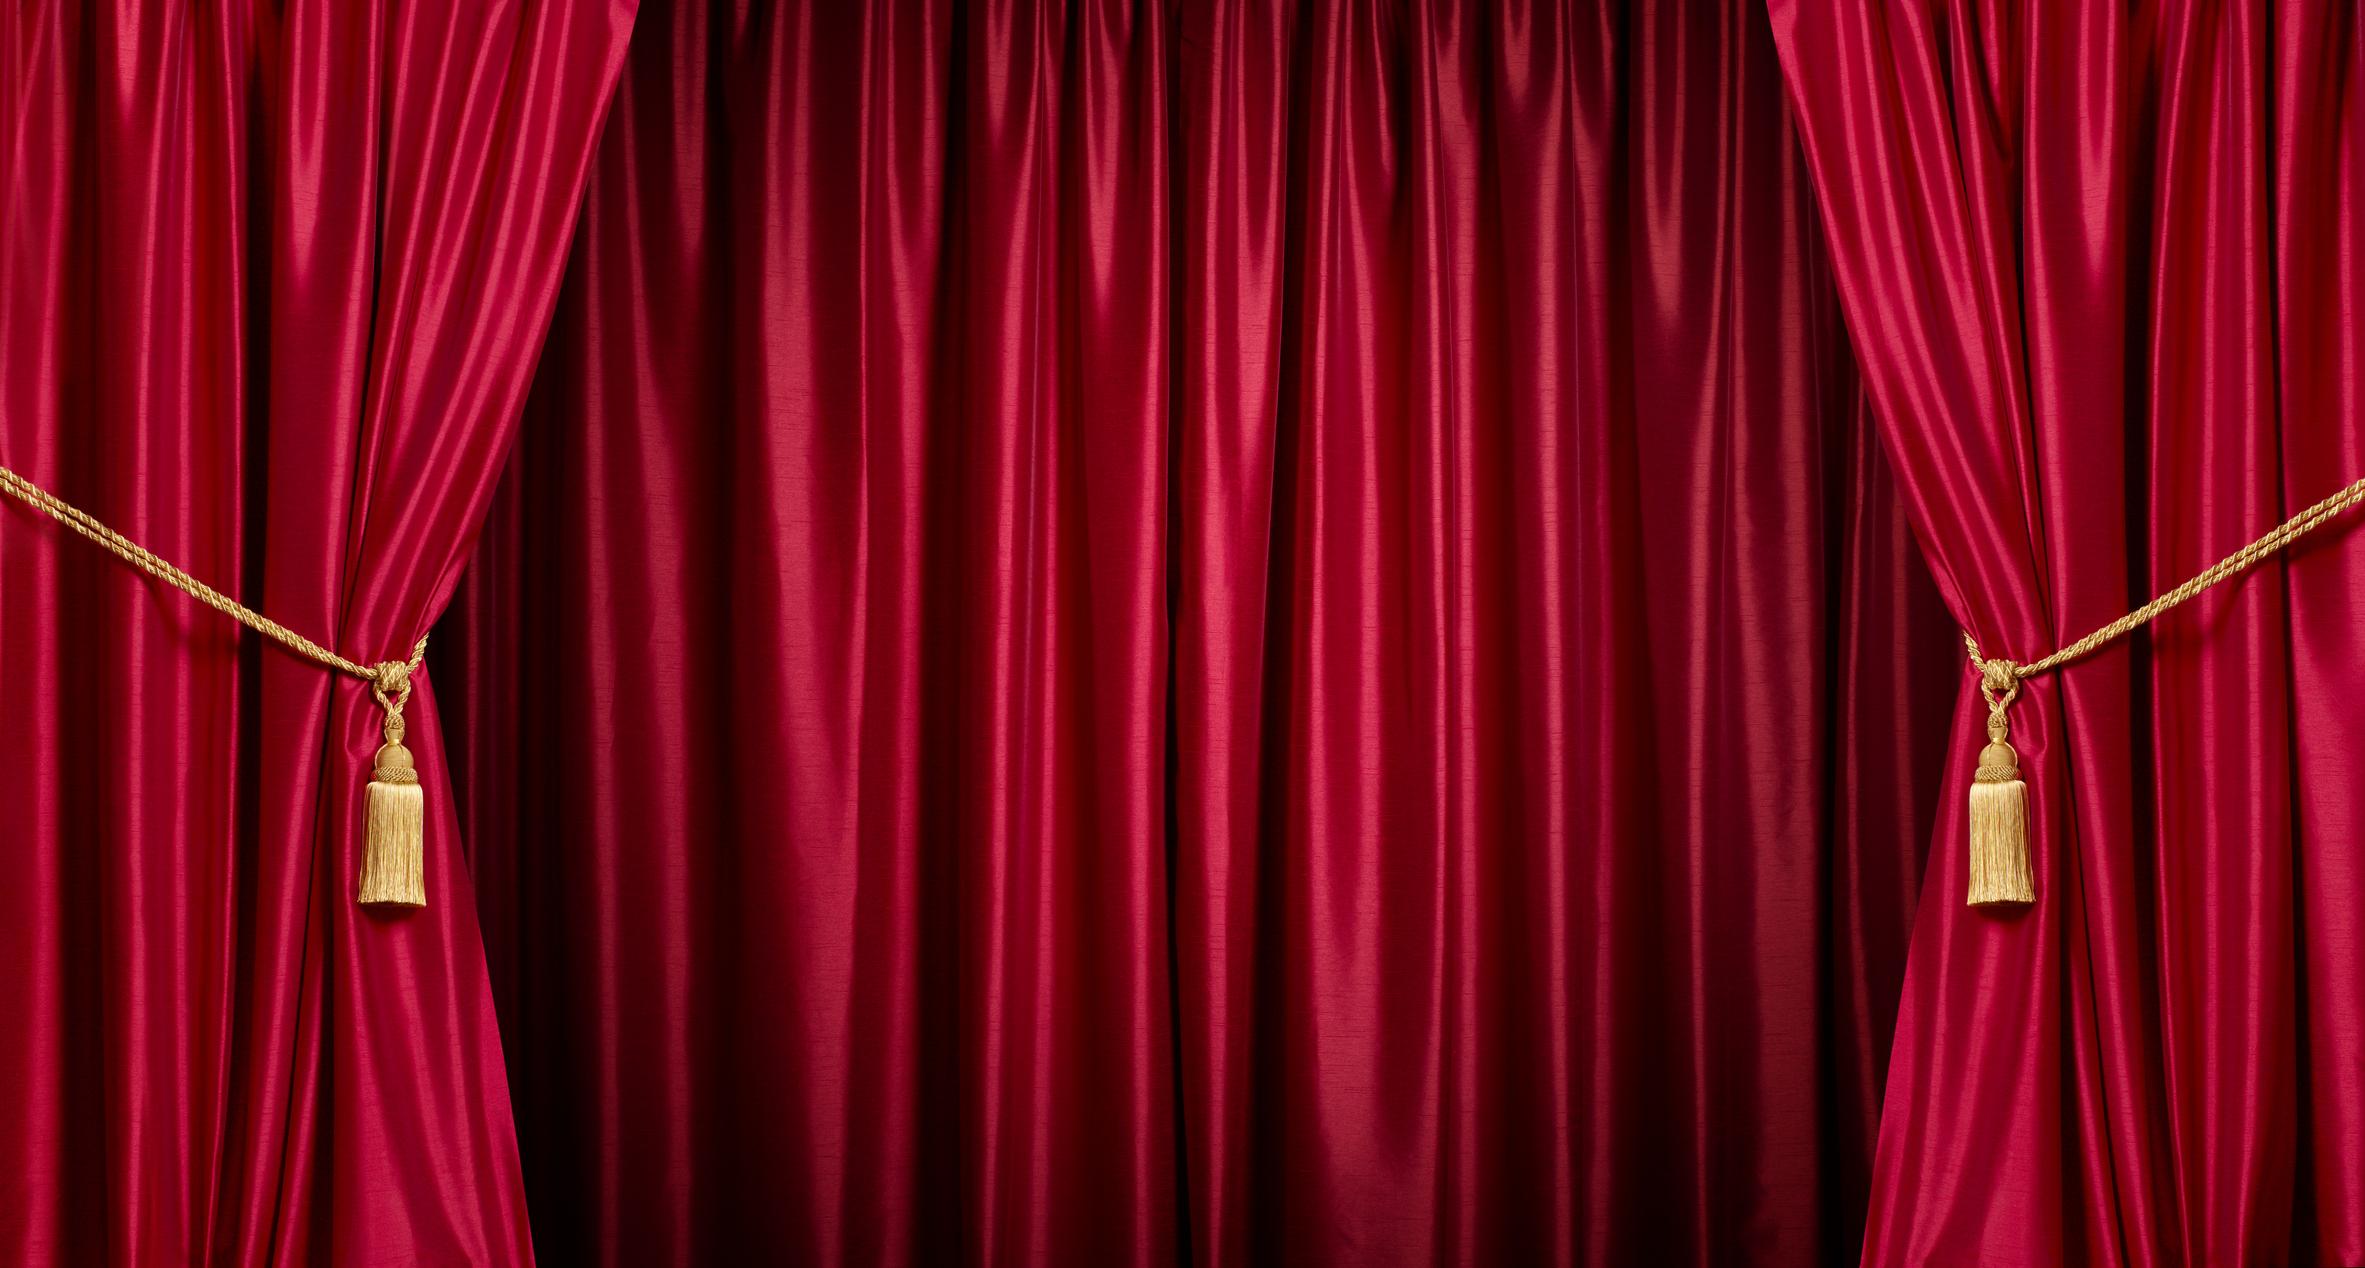  Background/theatre red curtains 